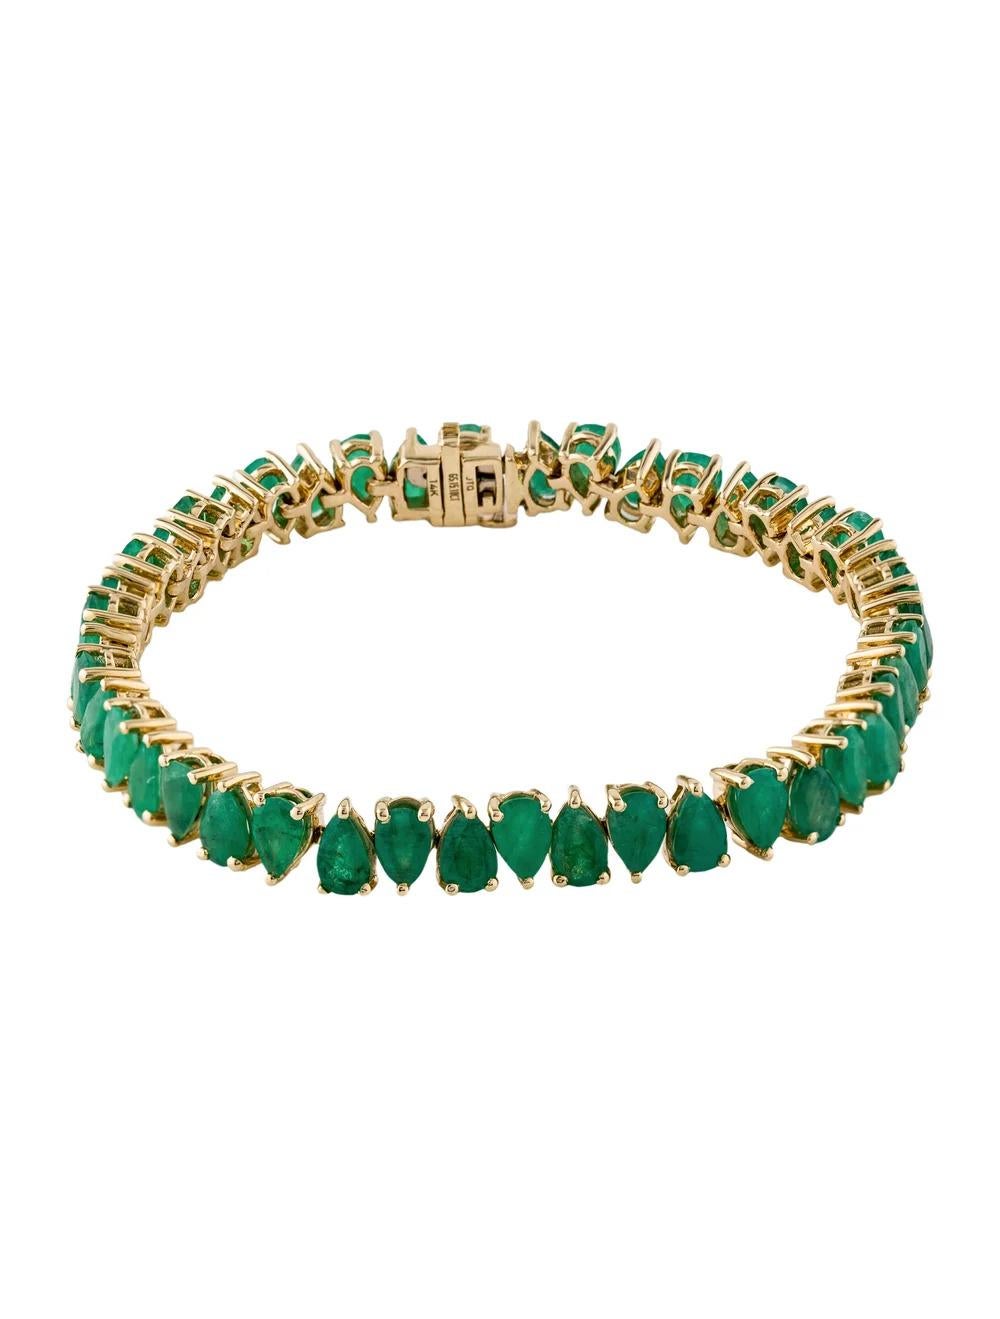 Indulge in the enchanting allure of this exquisite 14K Yellow Gold Emerald Bracelet, featuring a captivating array of Mixed Cut and Pear Shaped Emeralds totaling 15.10 carats. Meticulously crafted with precision and care, this bracelet exudes